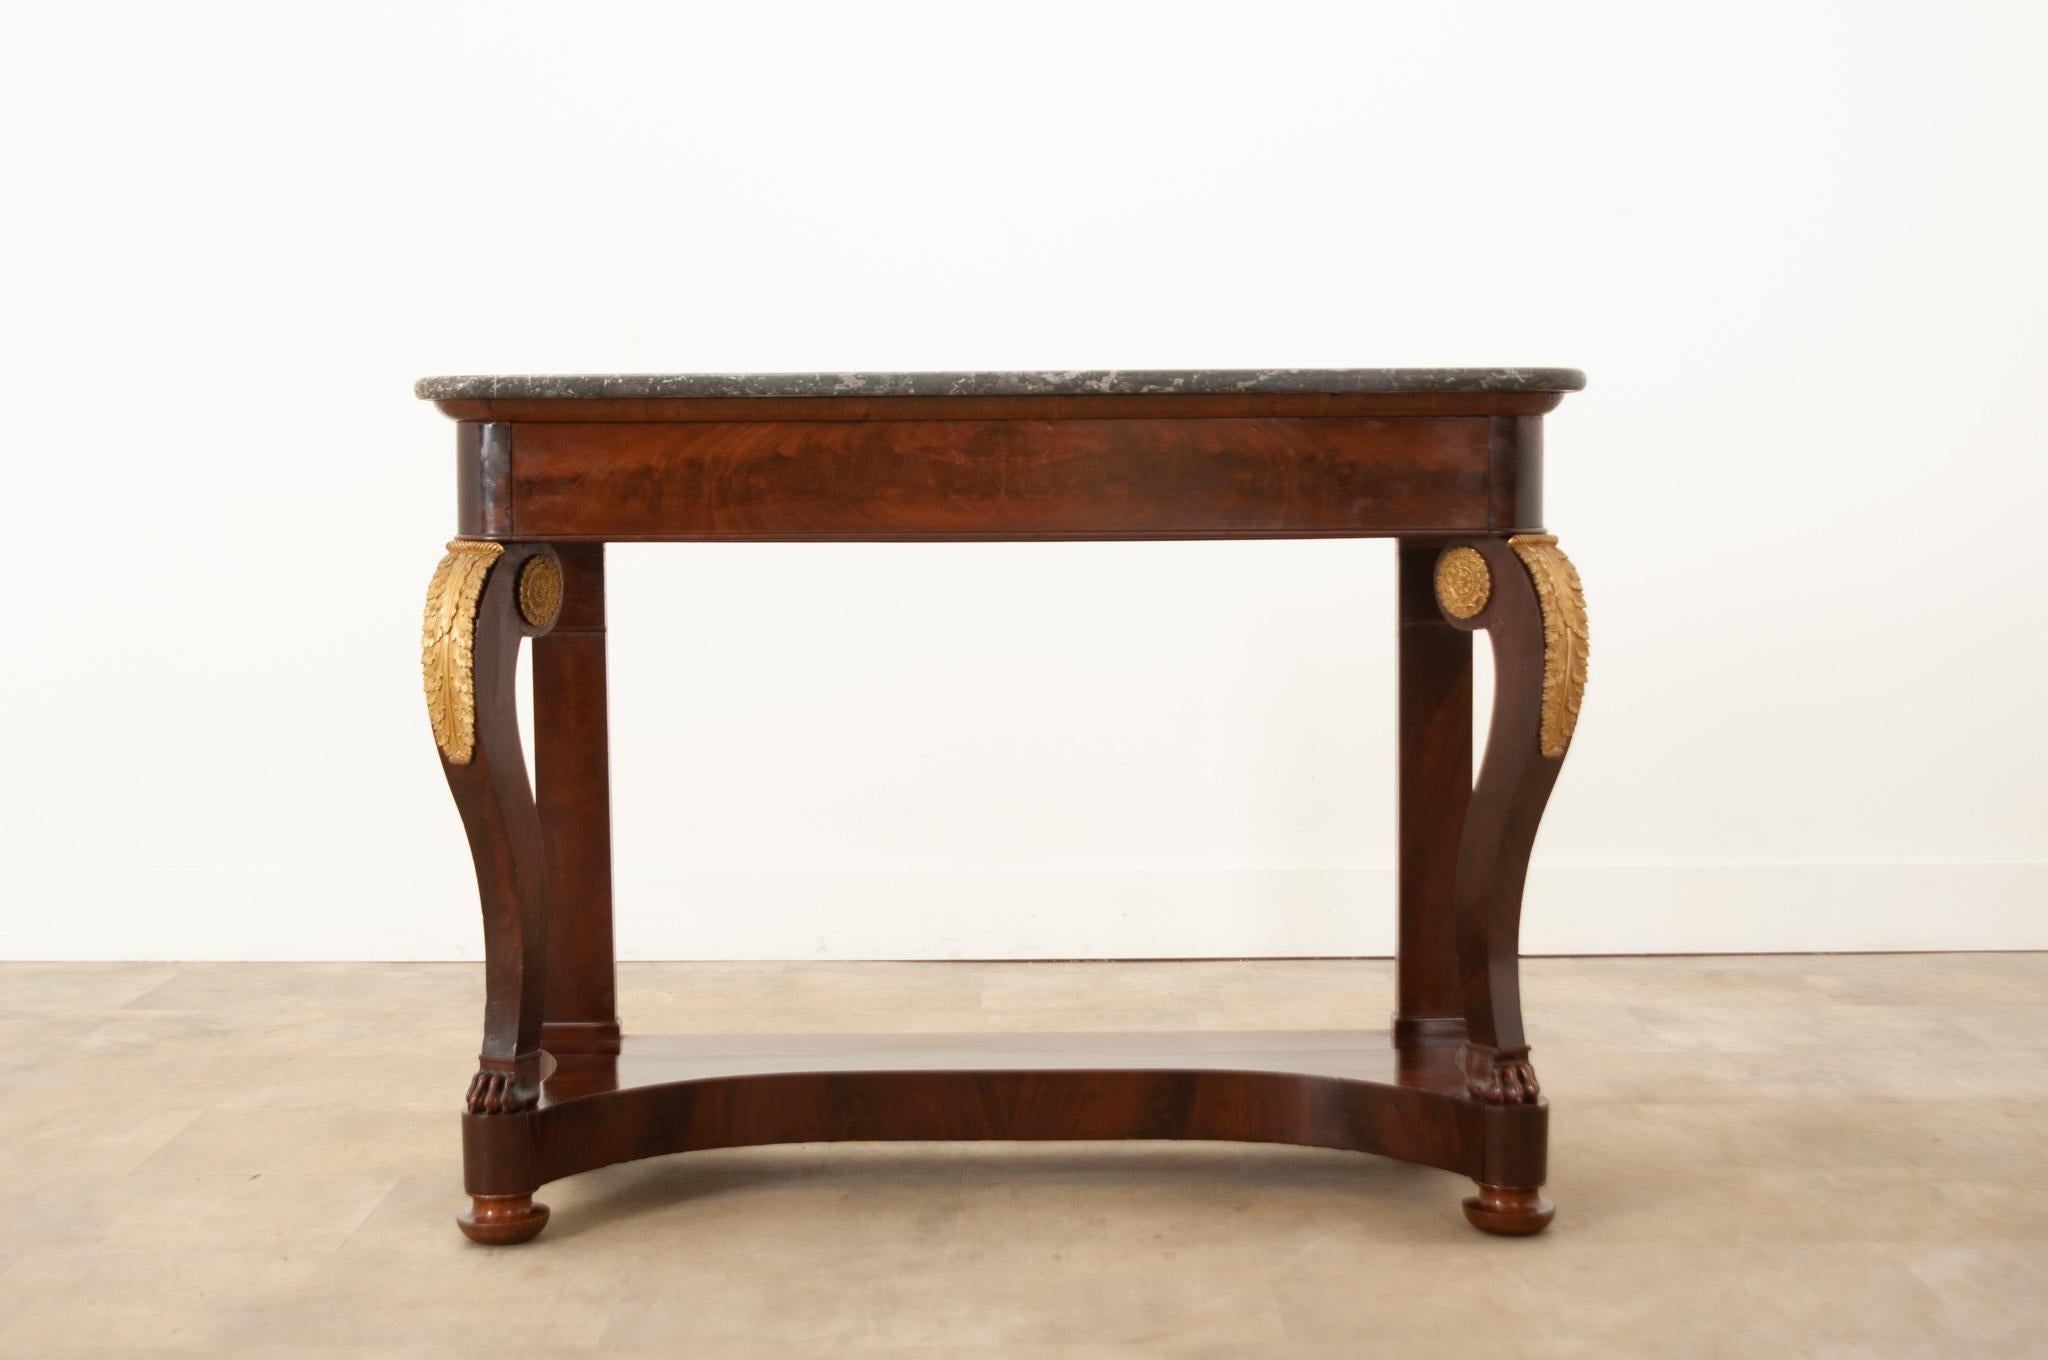 An elegant 19th century French Restauration console with its original removable piece of St Anne marble. The beautiful marble top sits over a thick shaped base, making its profile classic of the Restauration period. Thick flame mahogany veneer has